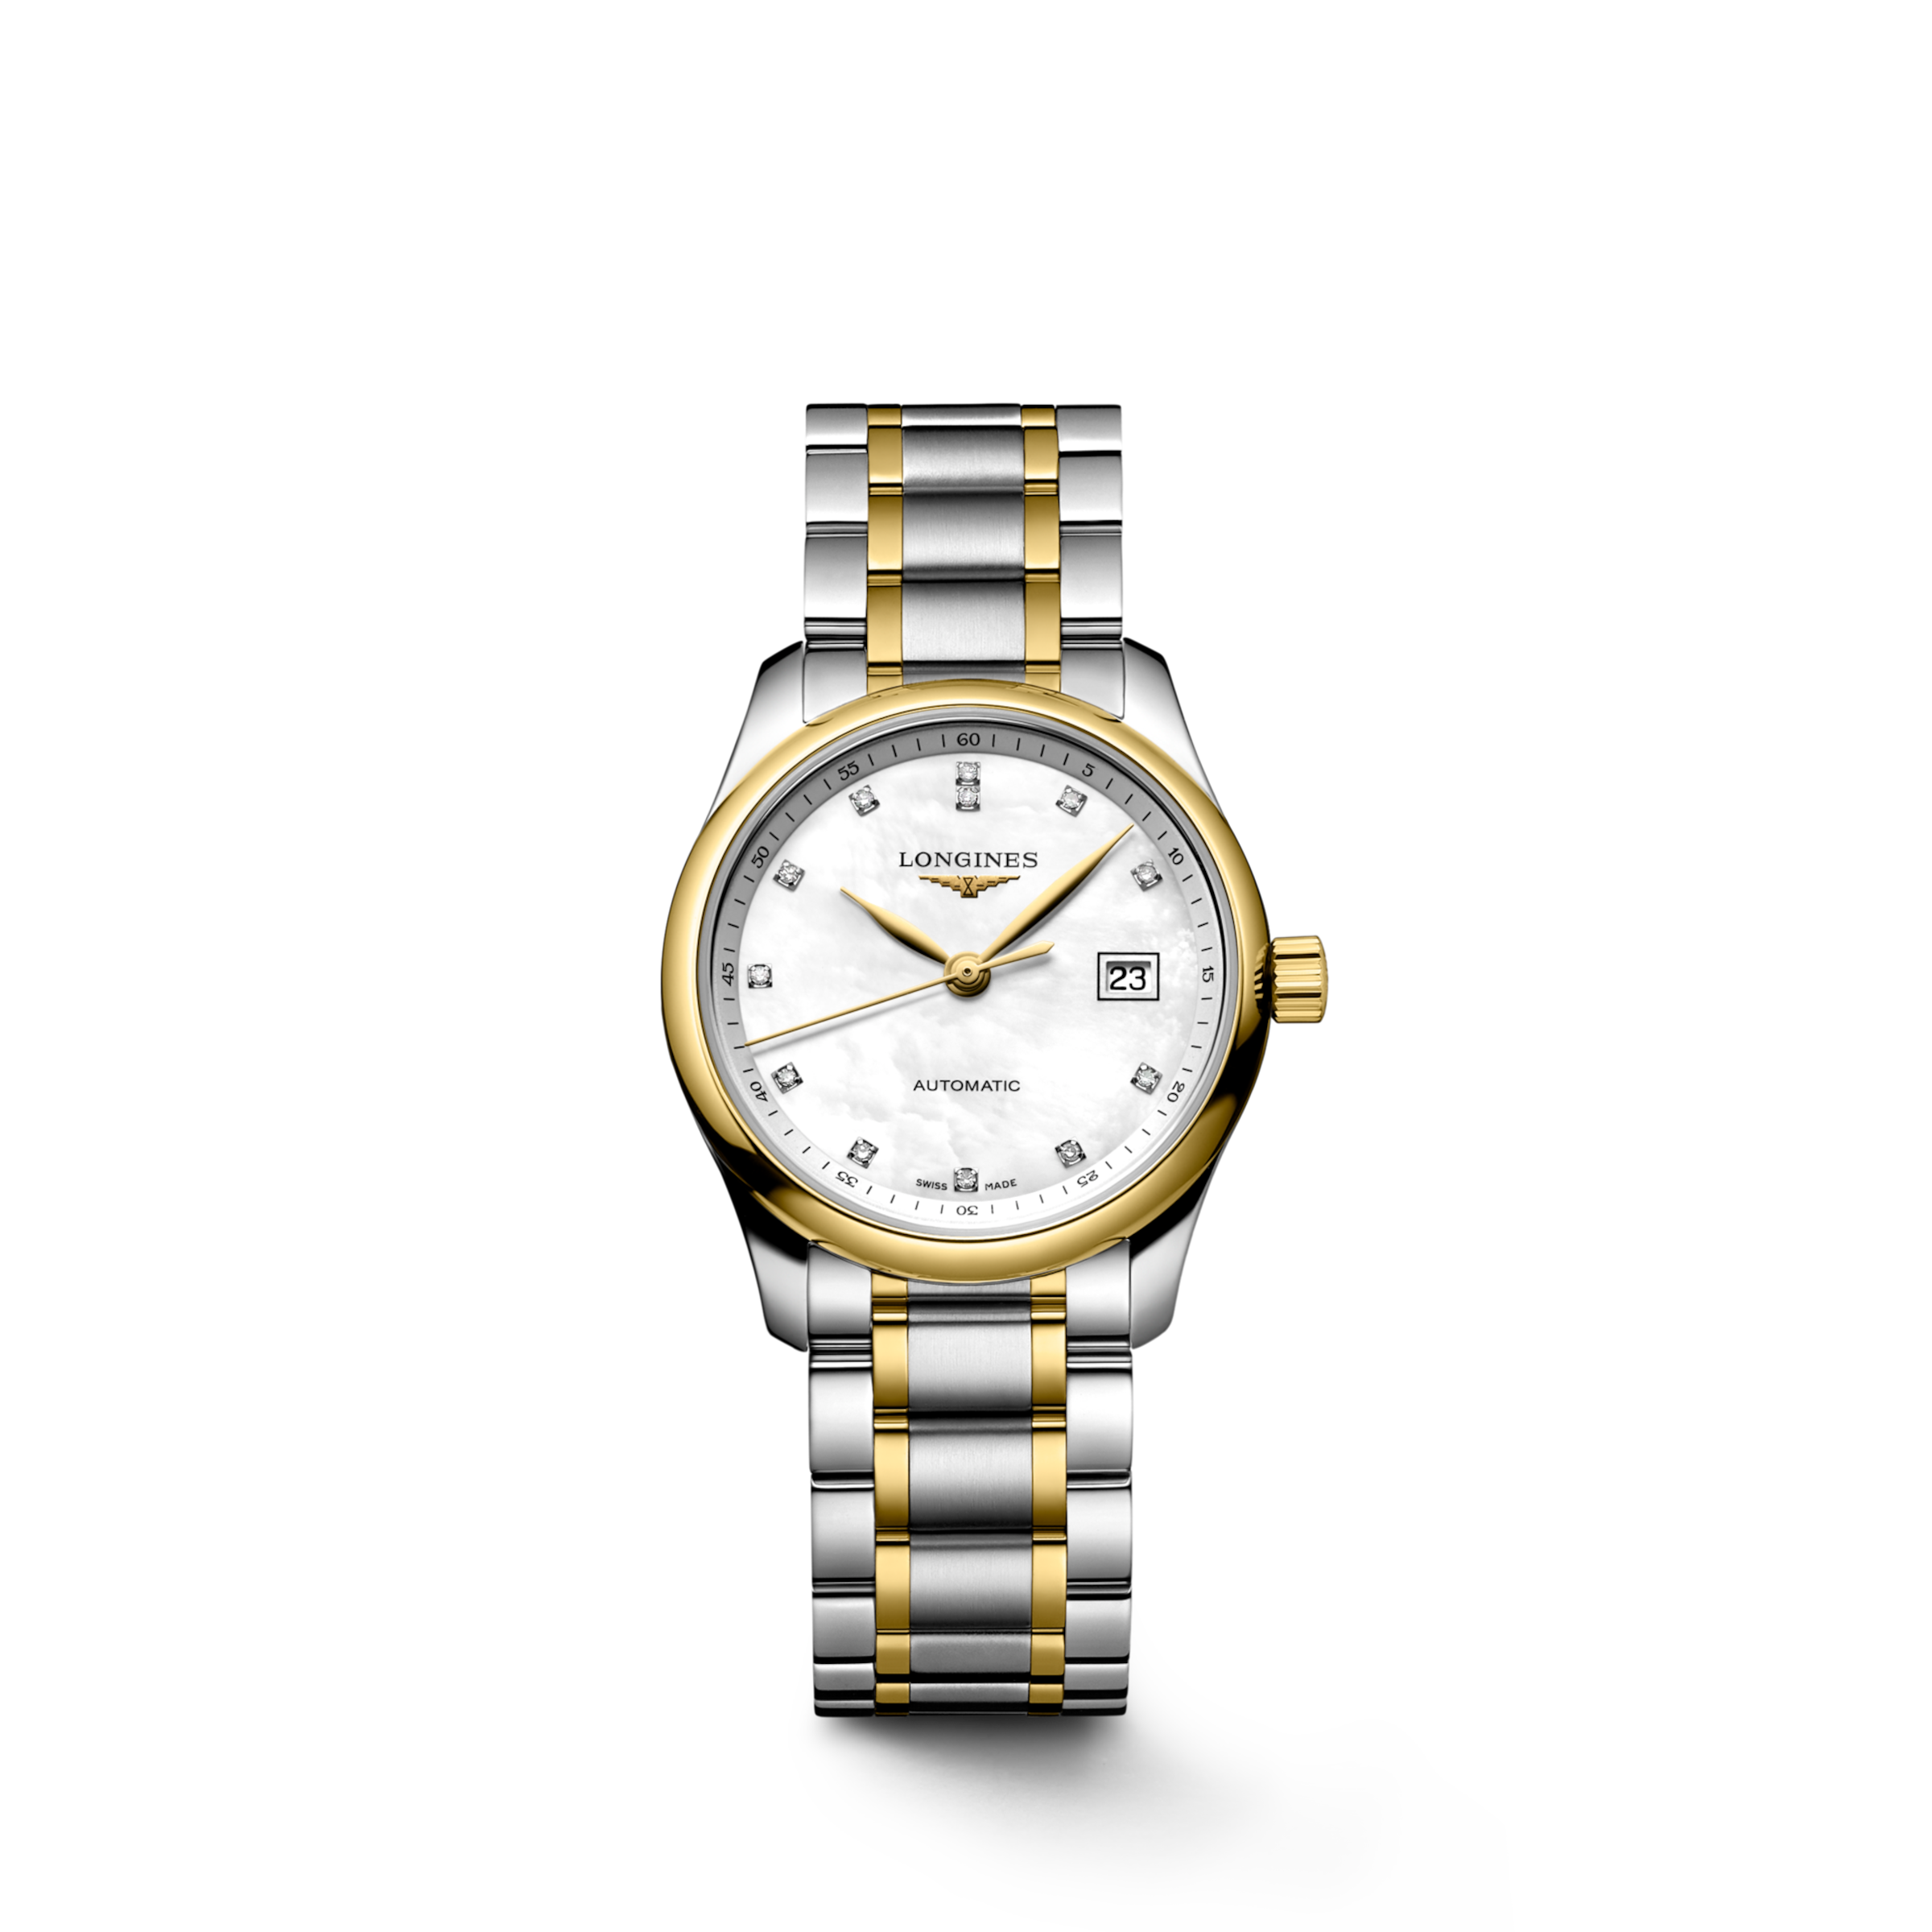 Longines MASTER COLLECTION Automatic Stainless steel and 18 karat yellow gold cap 200 Watch - L2.257.5.87.7